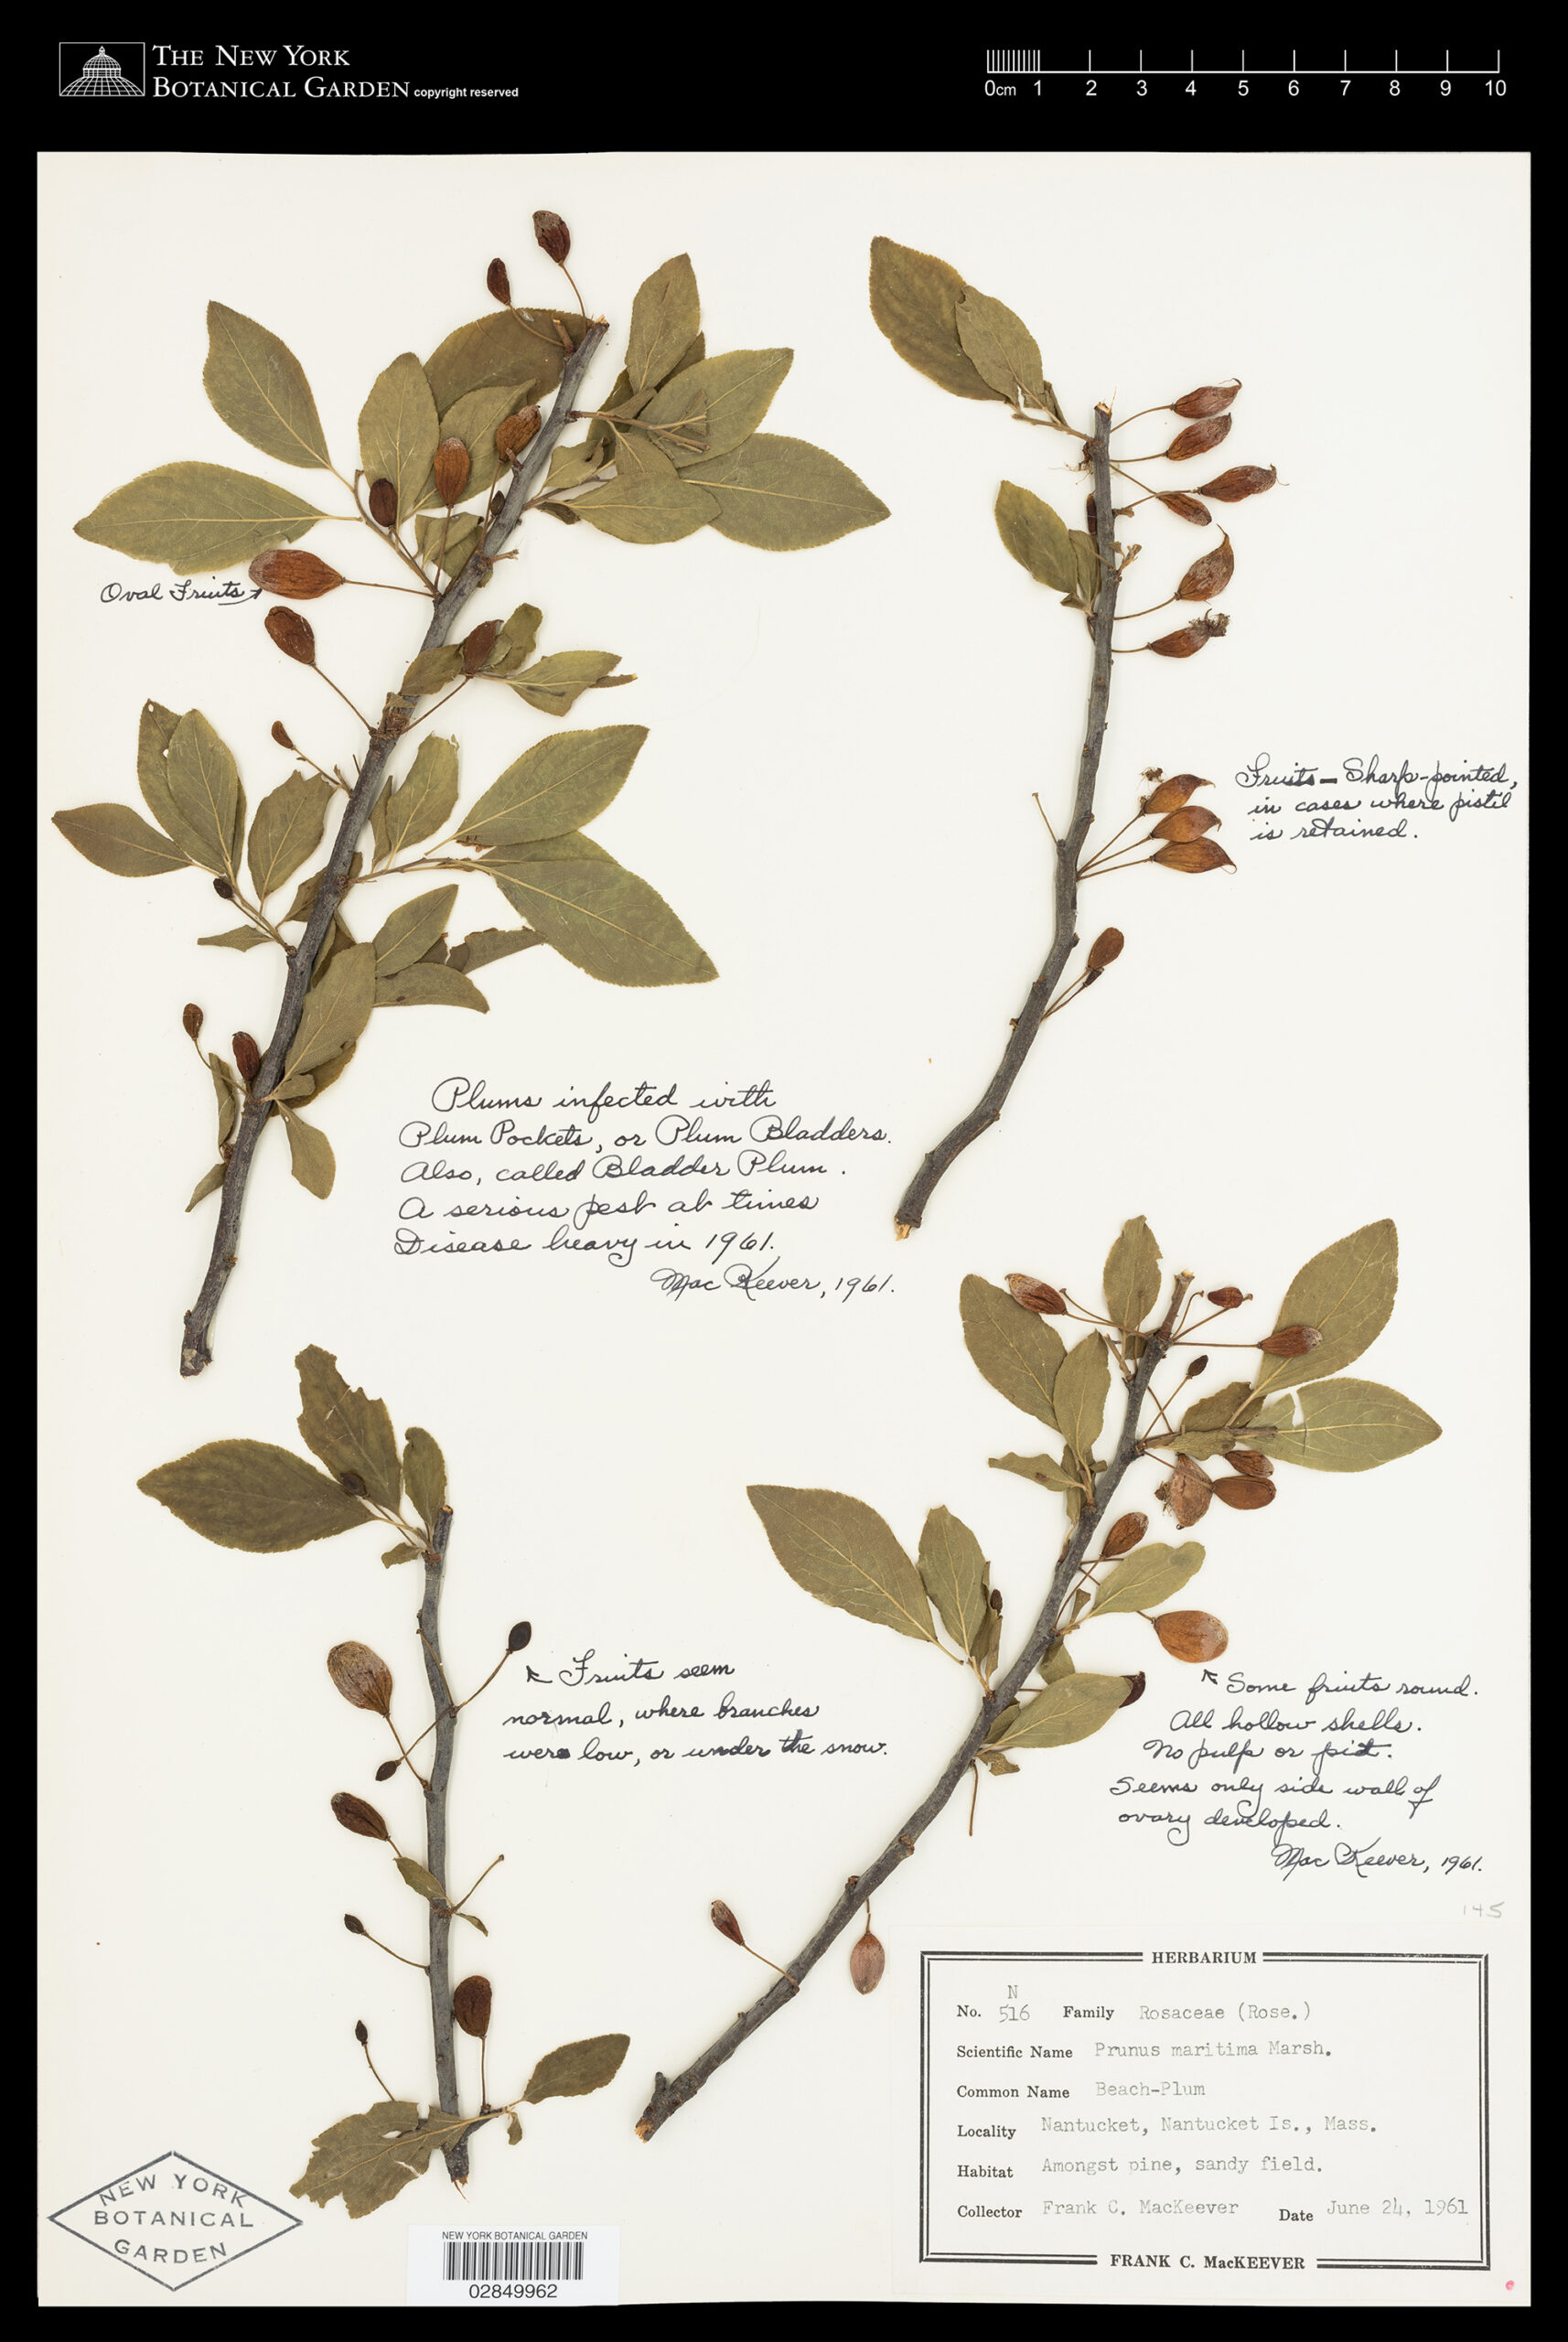 An image of dried specimen of beach plum branches with leaves, with cursive writing next to the specimen.